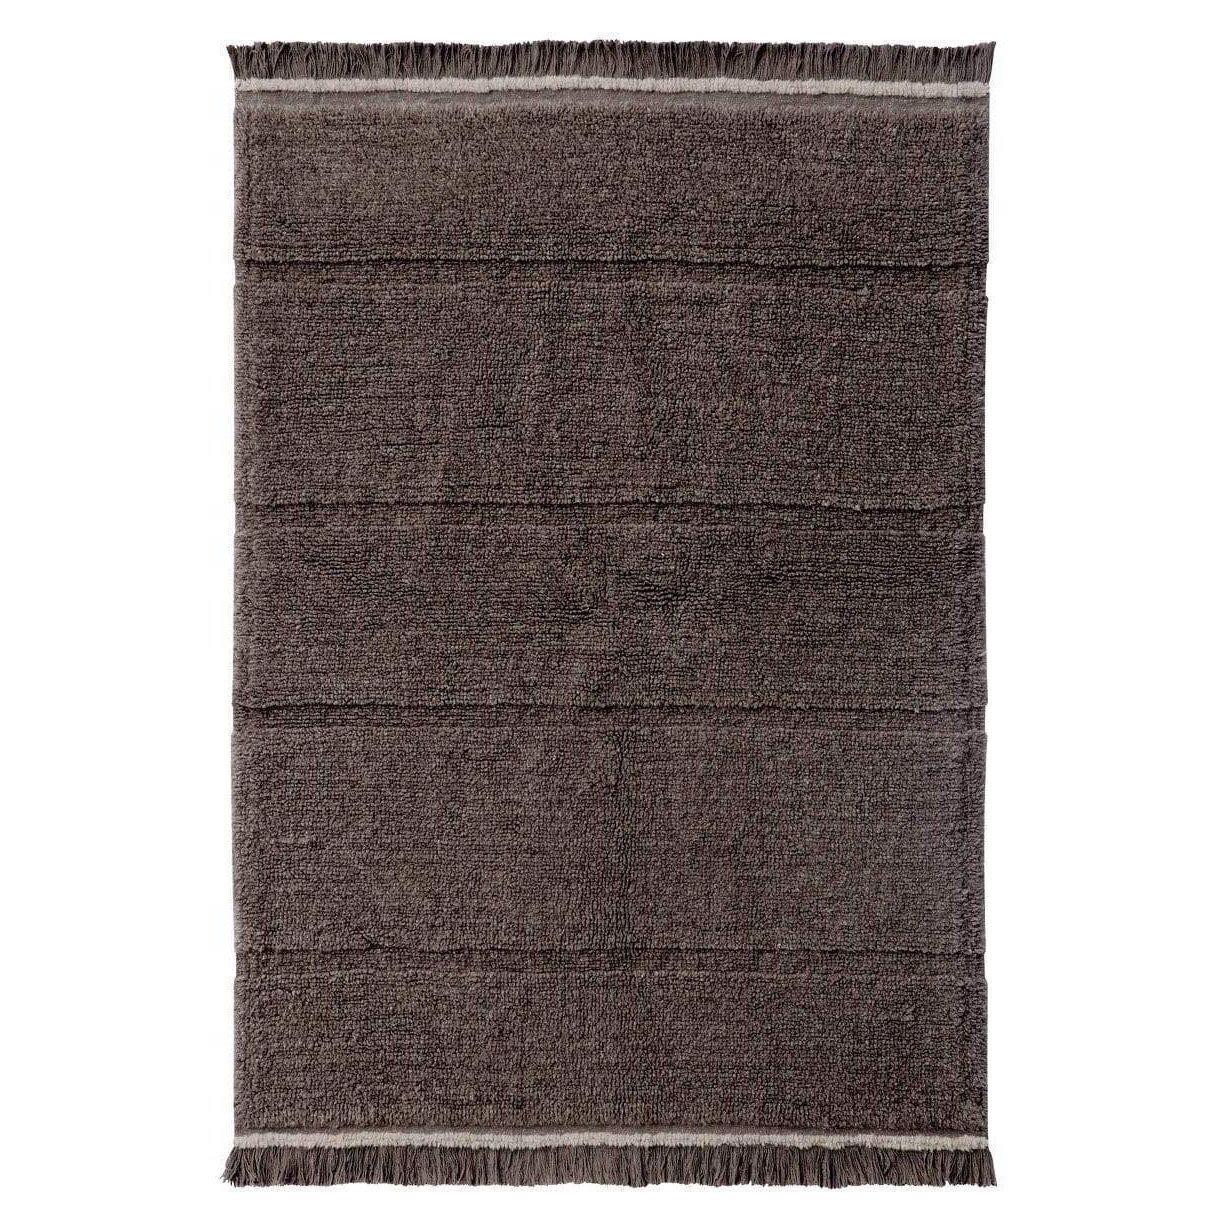 Lorena Canals Steppe Brown Woolable Area Rug